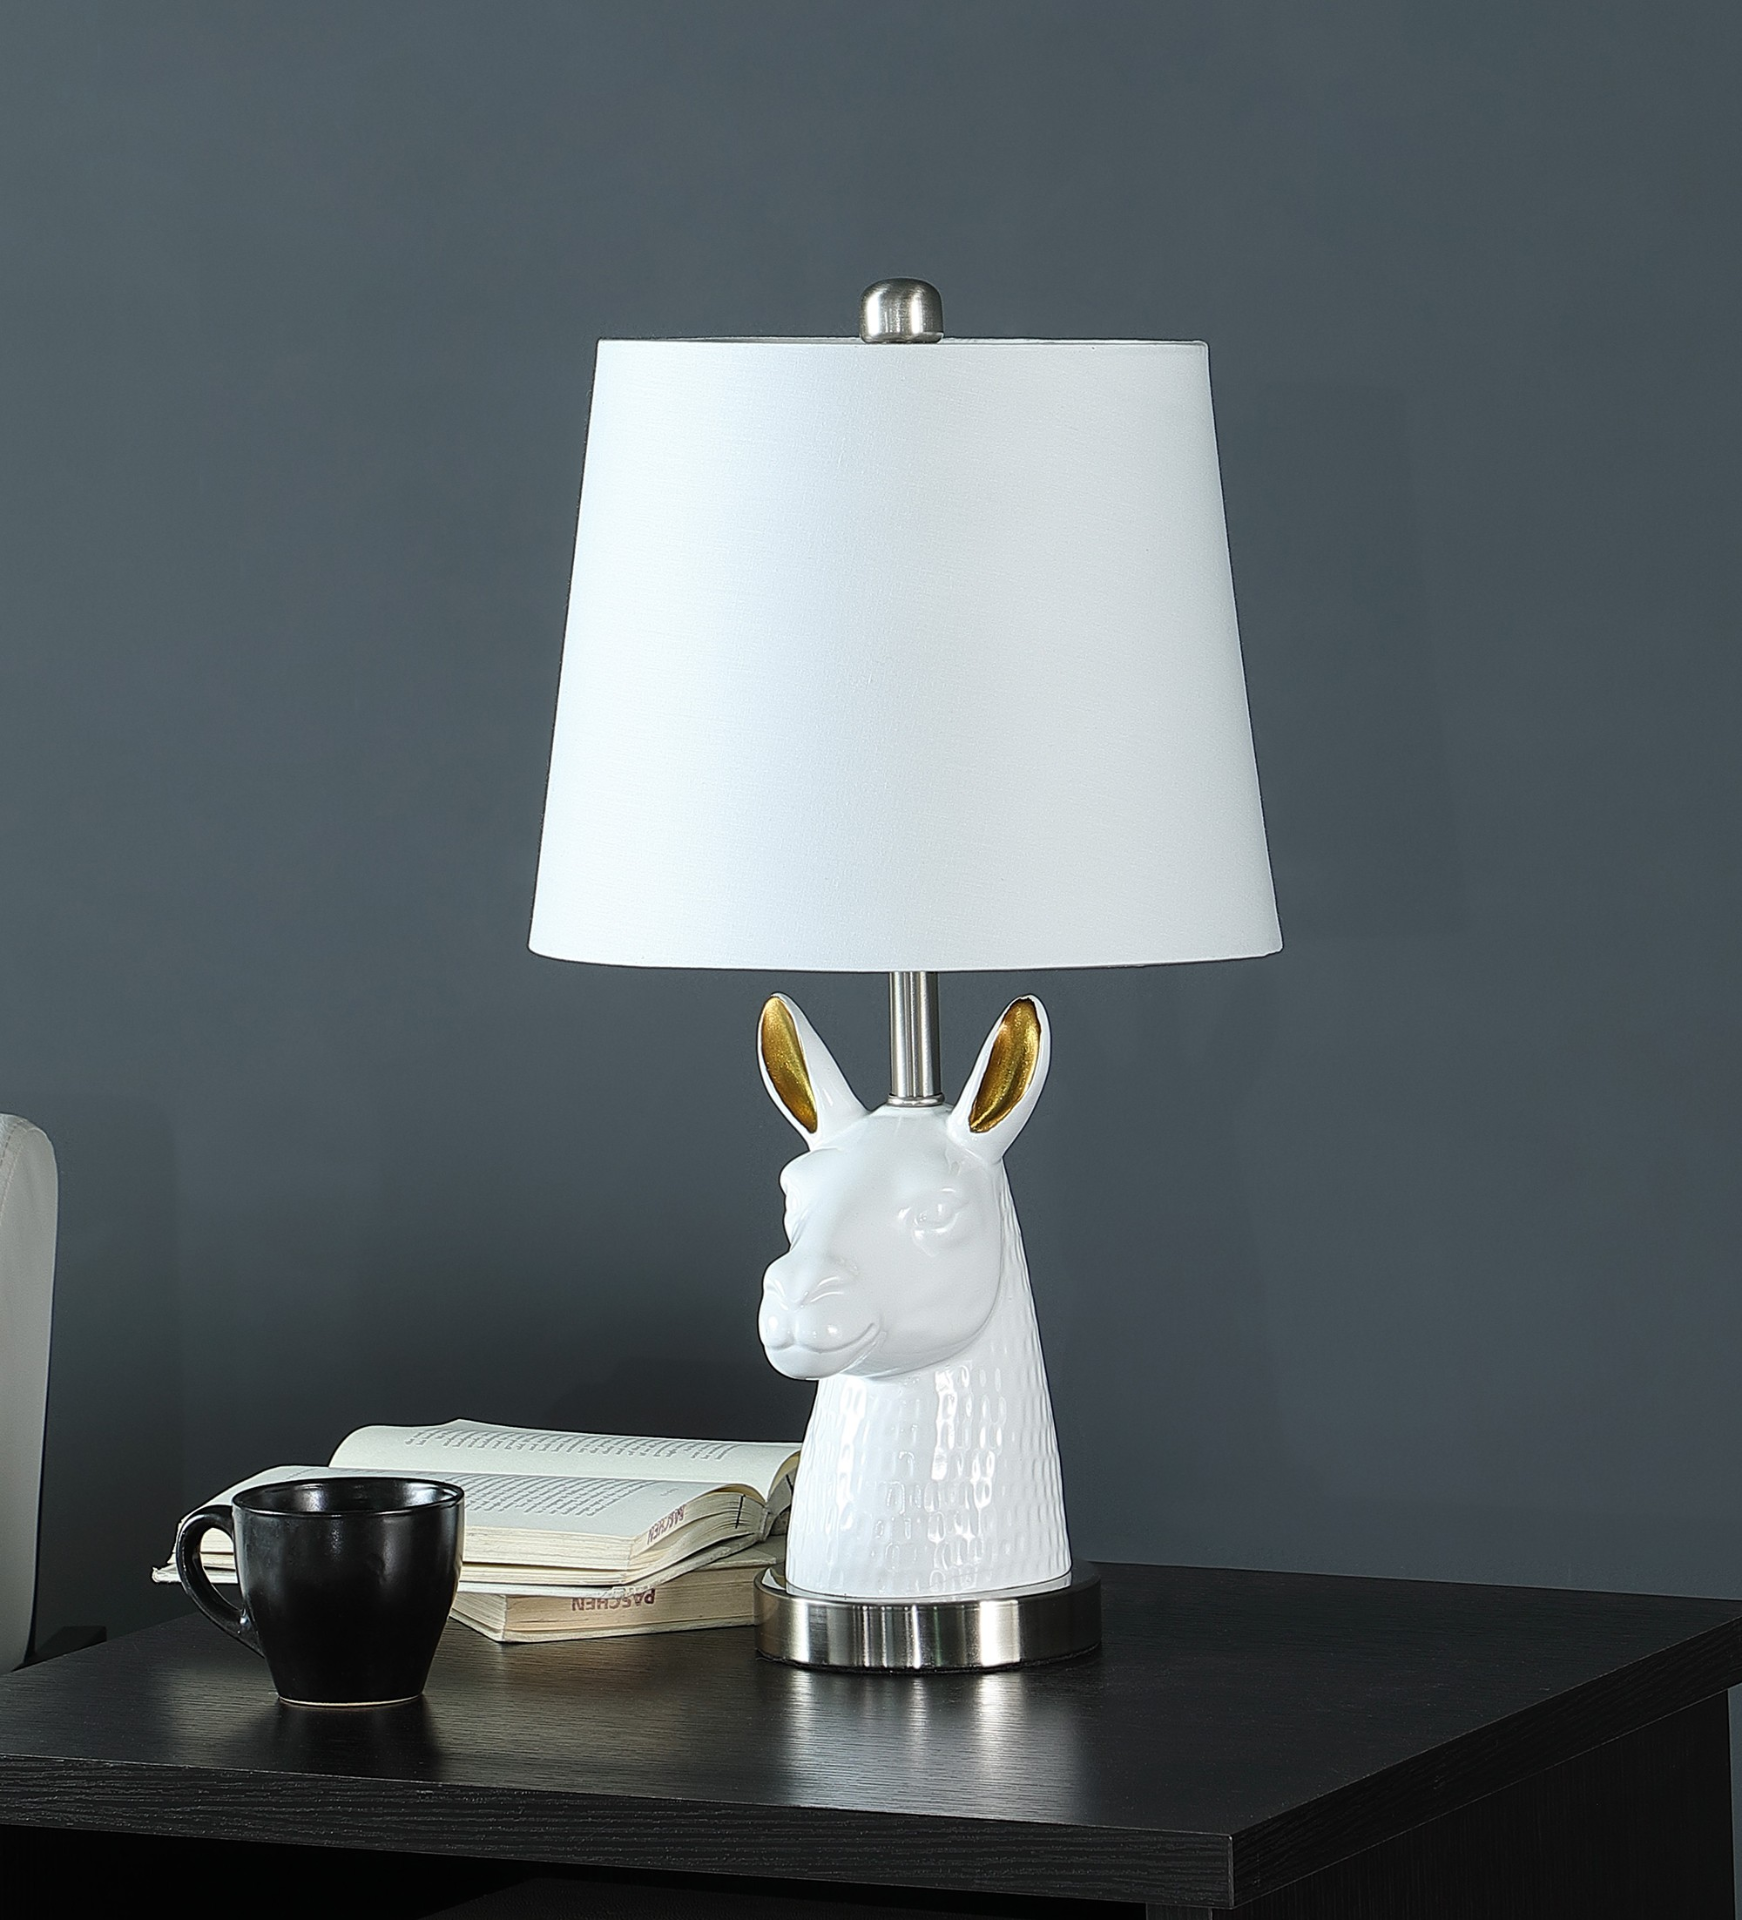 Llama Table Lamp - 21” White and Gold Higher GAllery Home Office